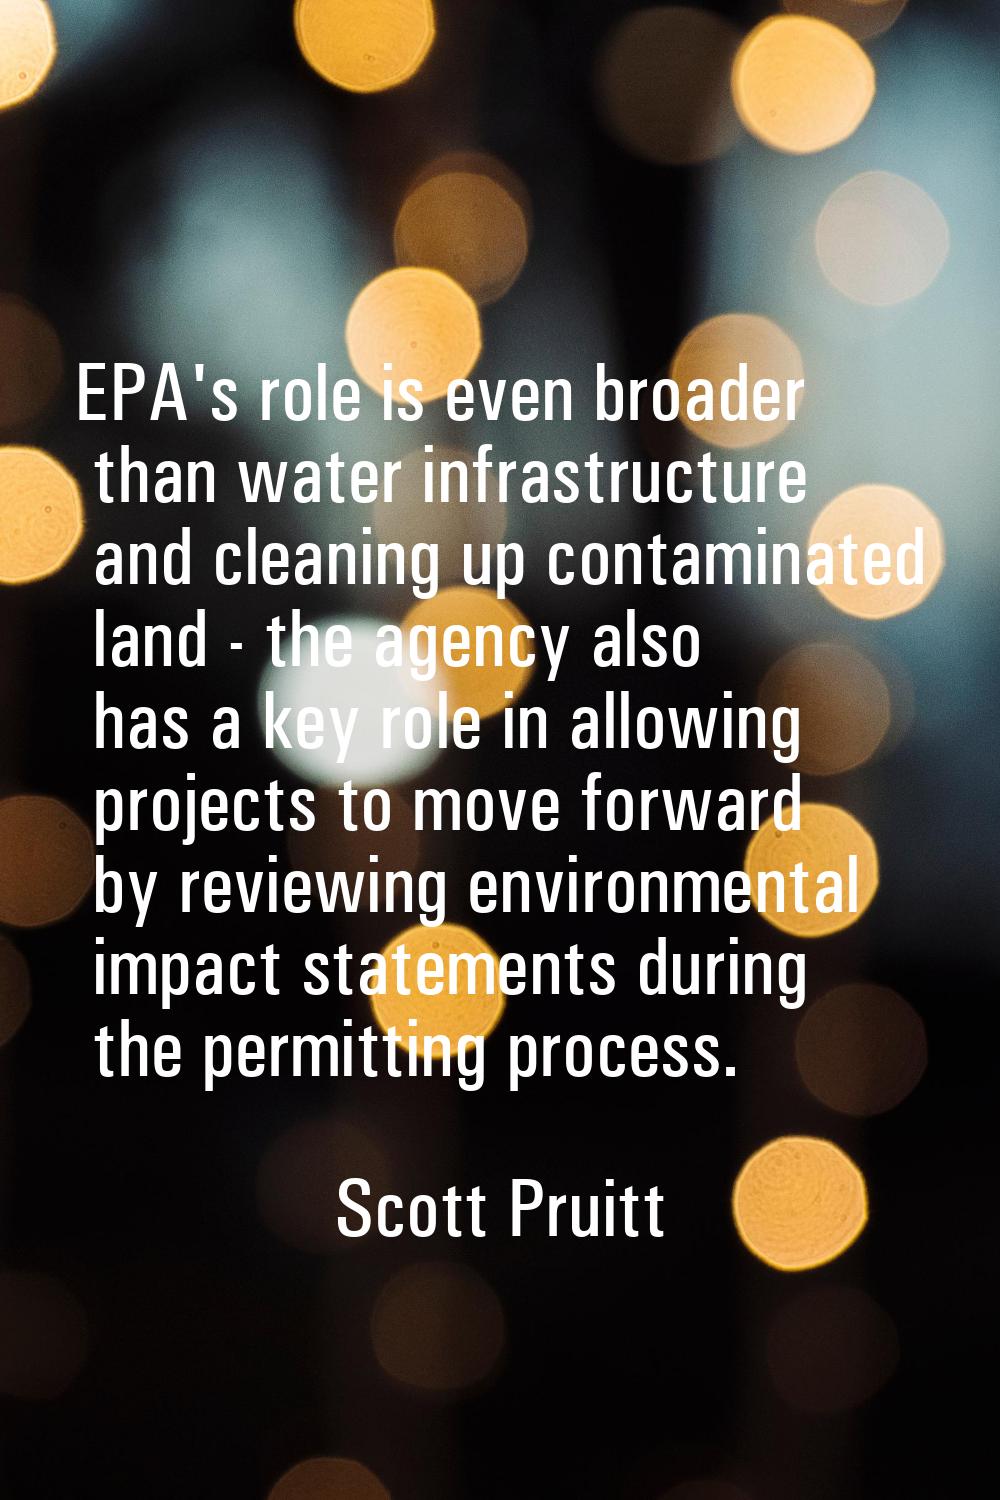 EPA's role is even broader than water infrastructure and cleaning up contaminated land - the agency